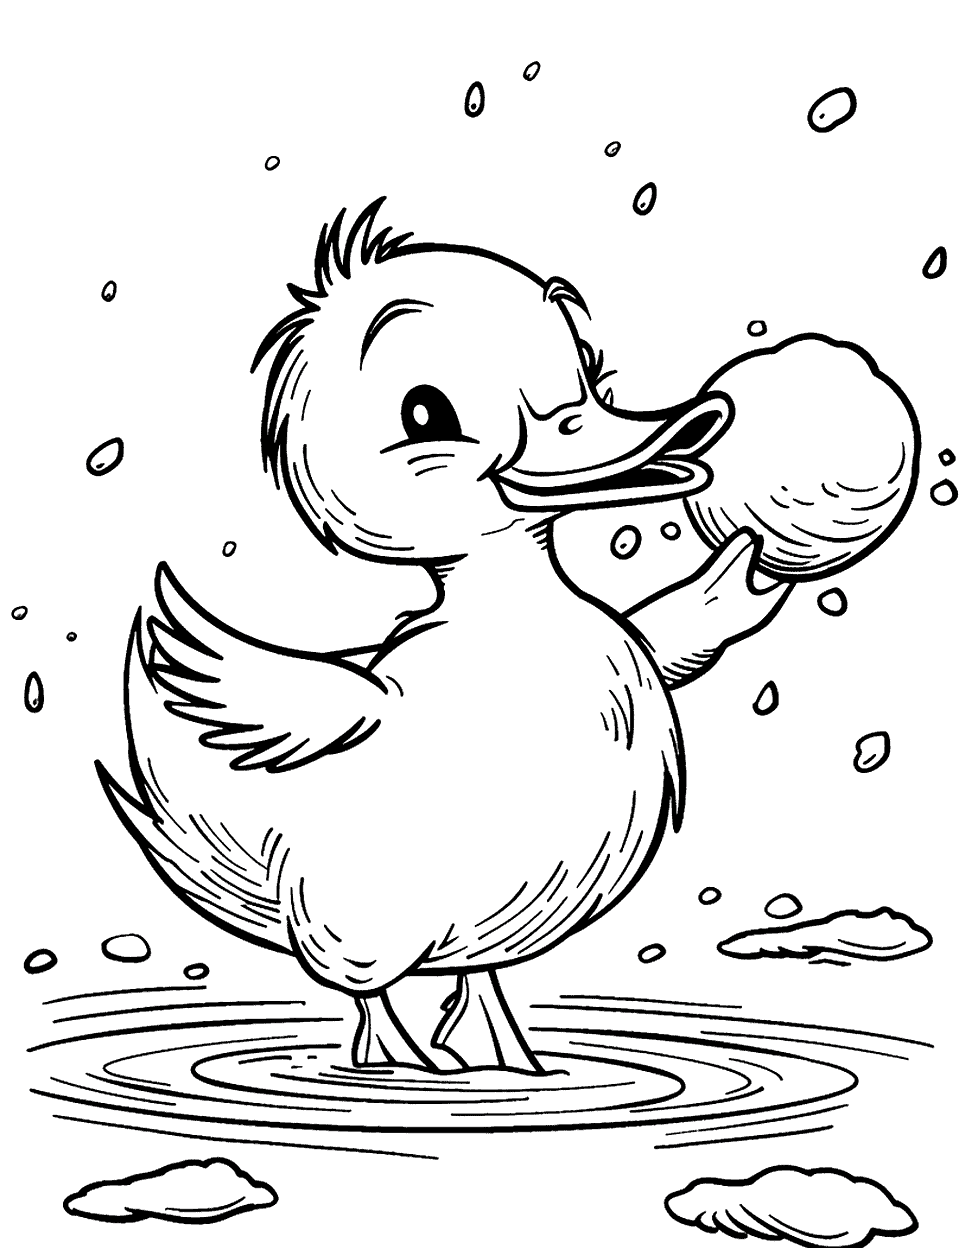 Duck in a Snowball Fight Coloring Page - A playful duck throwing snowballs